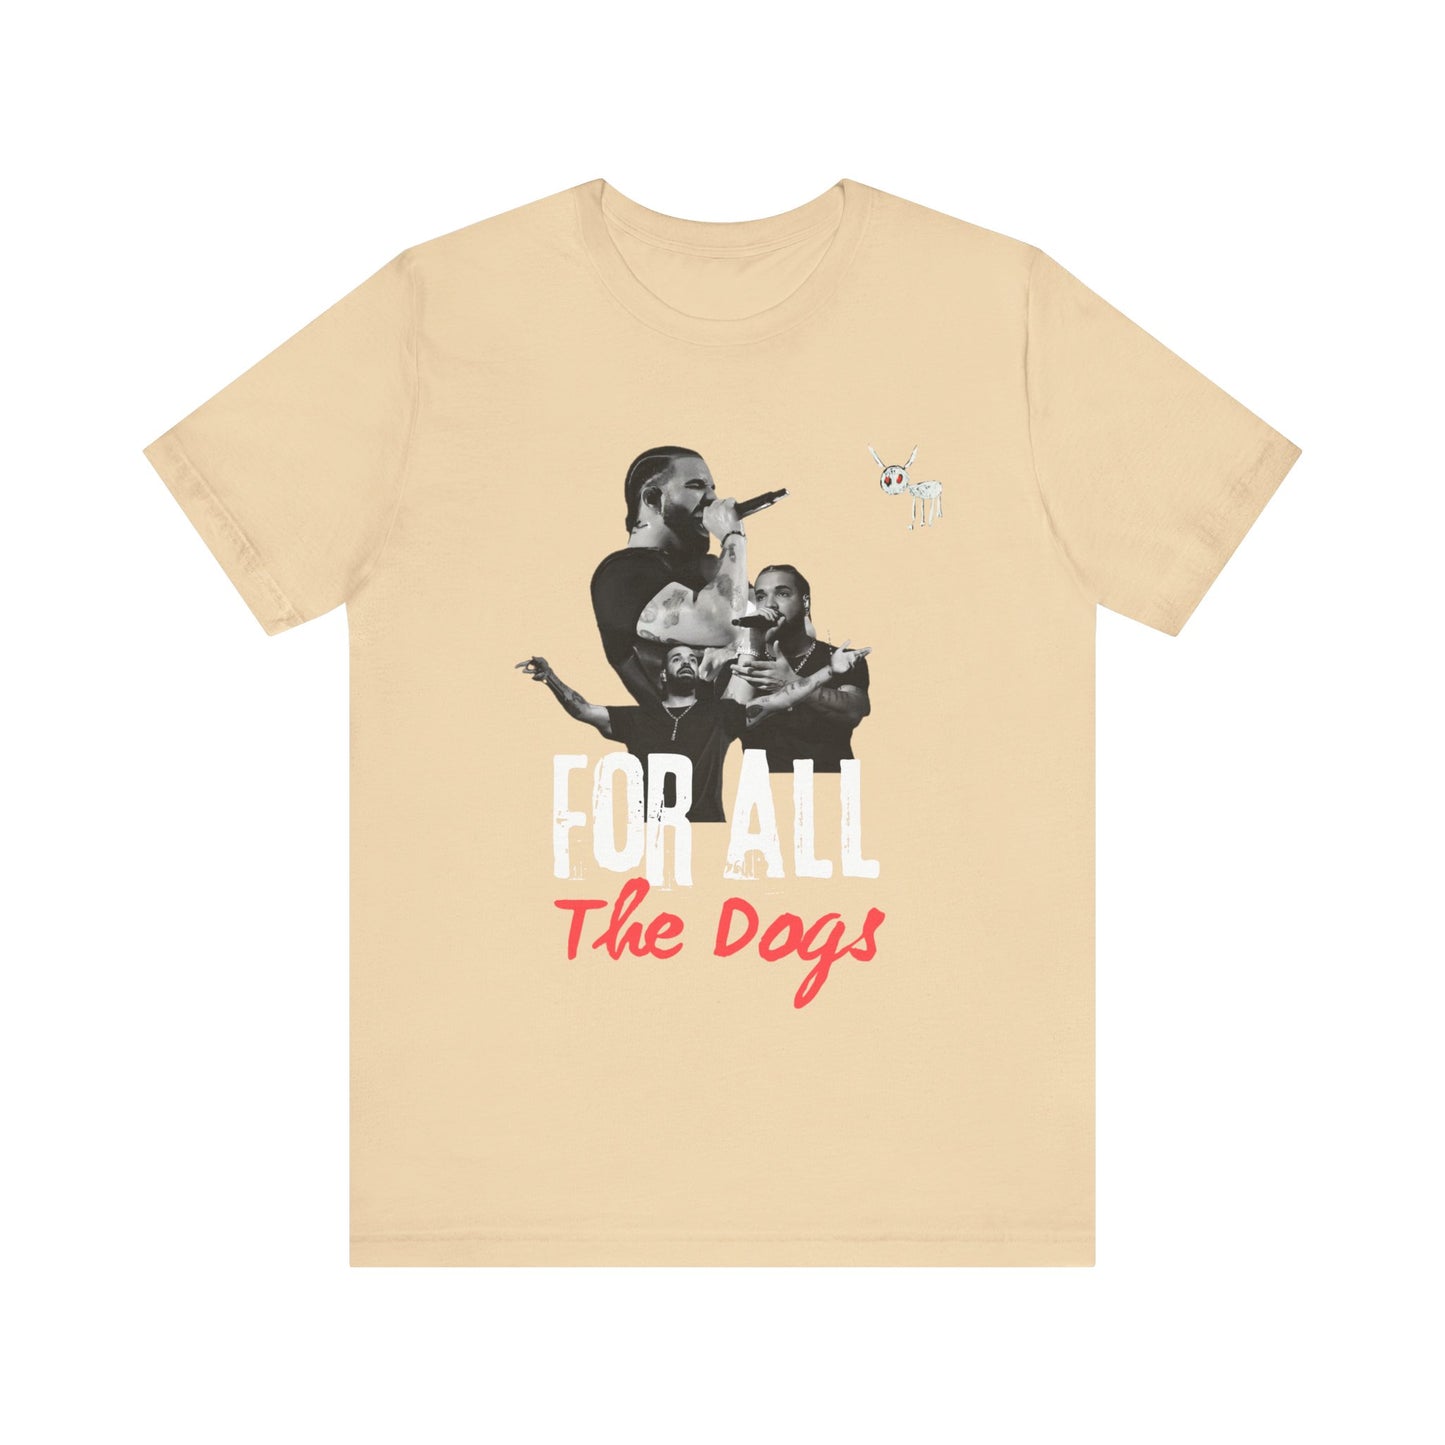 Drake “For All The Dogs” Tee